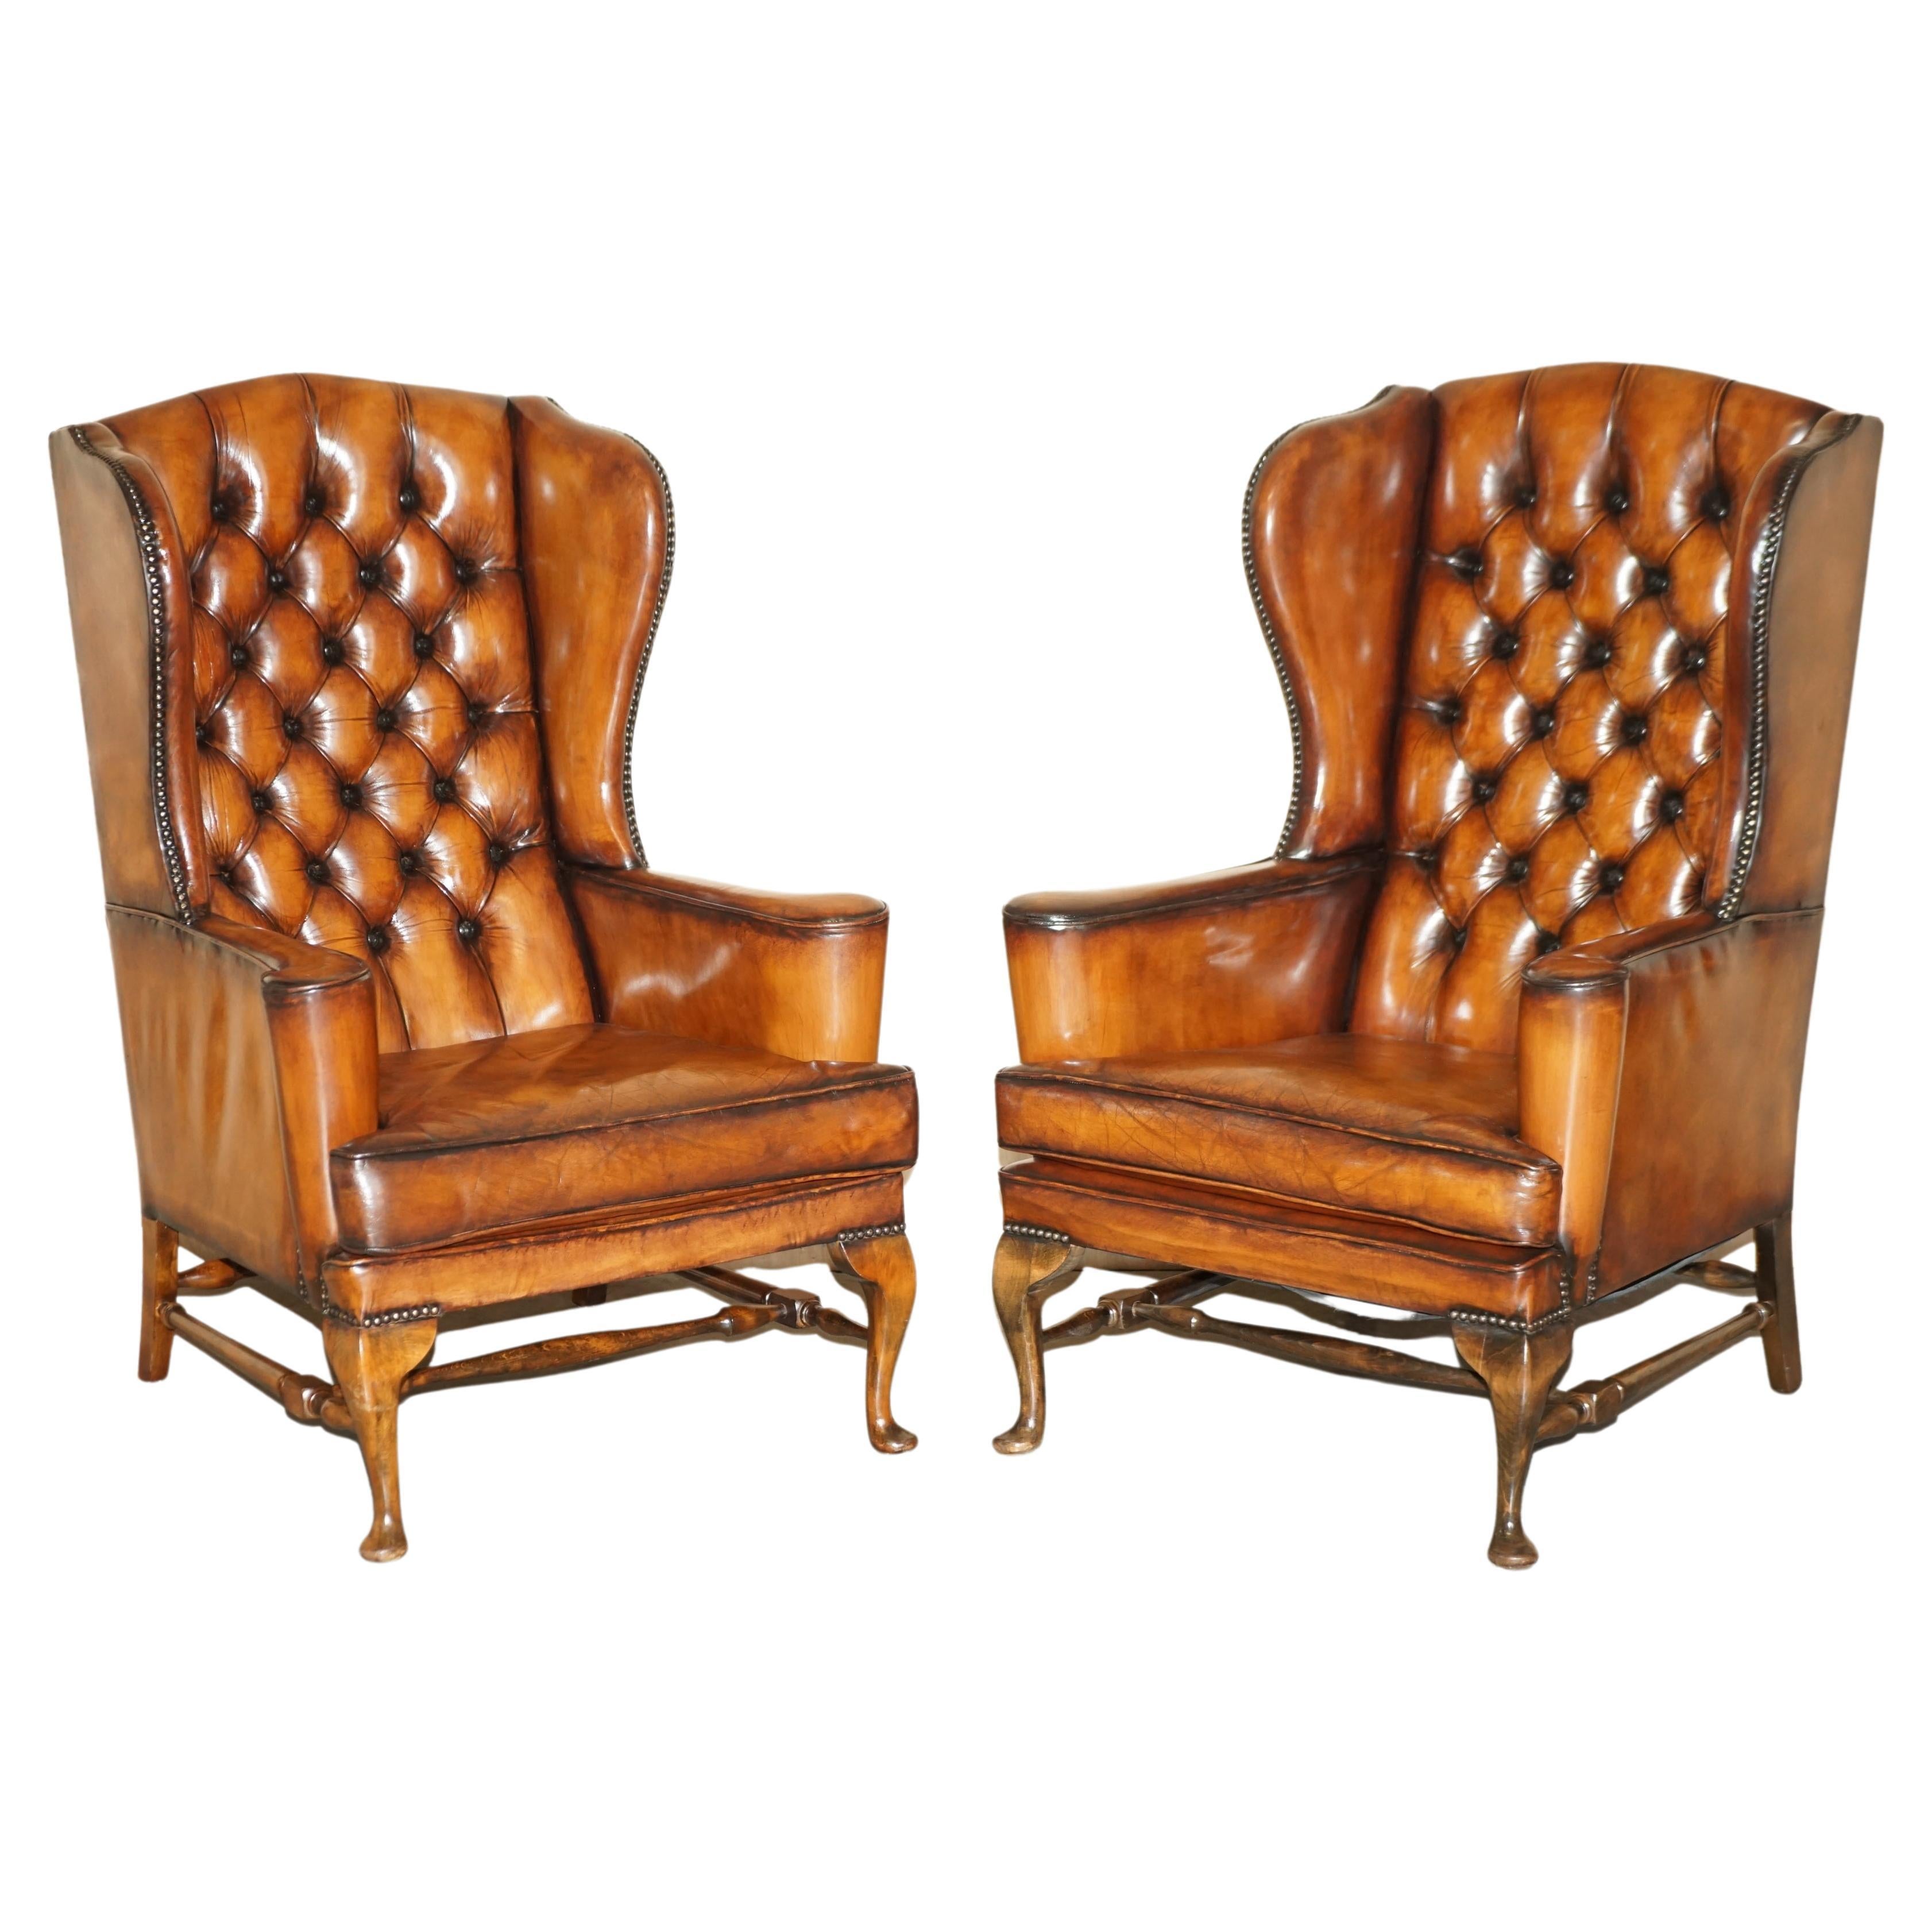 PAIR OF ANTIQUE WILLIAM MORRIS WiNGBACK ARMCHAIRS HAND DYED CIGAR BROWN LEATHER